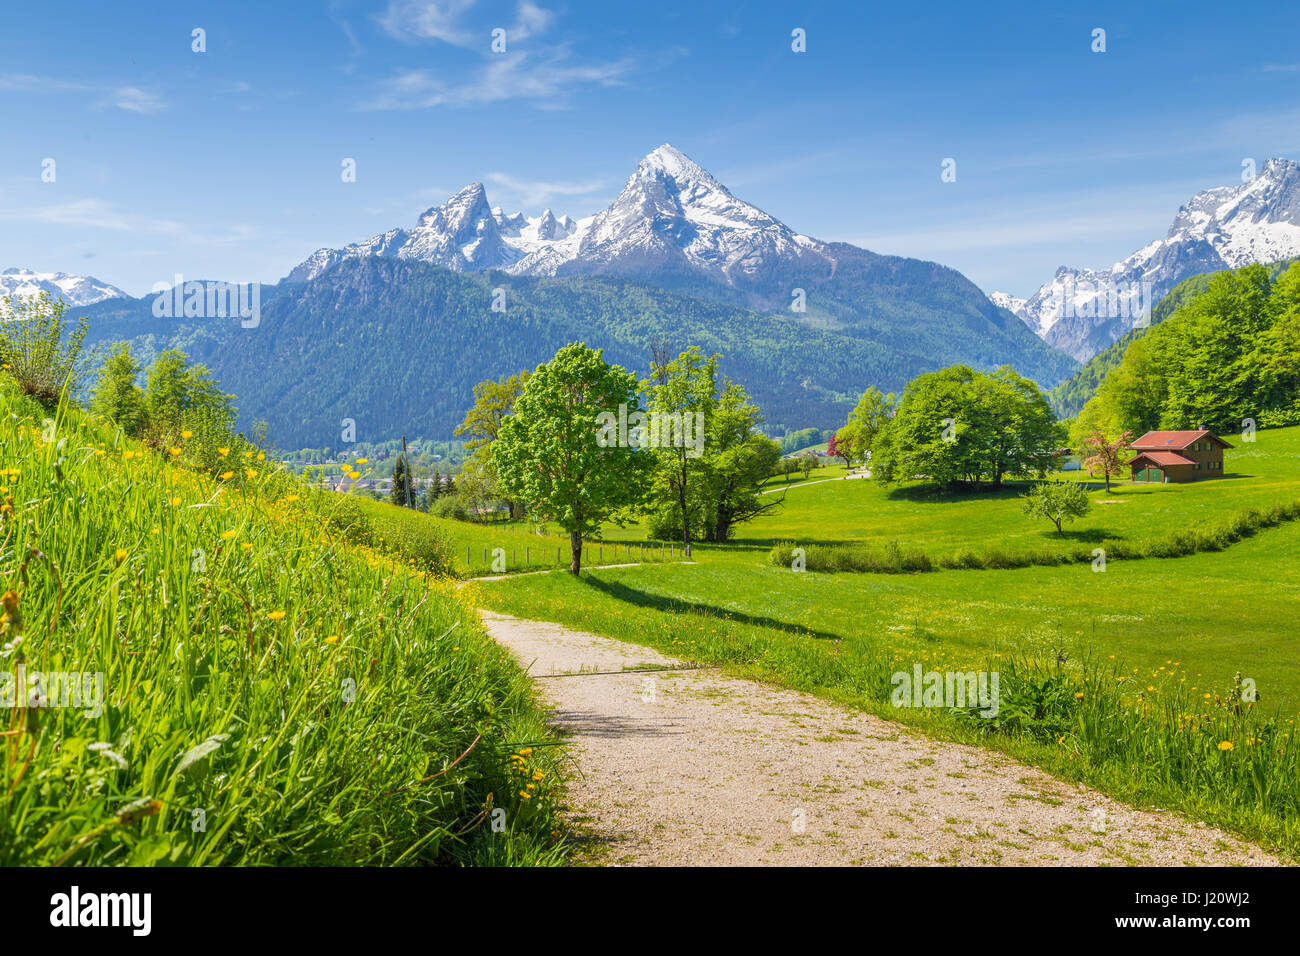 Beautiful view of idyllic mountain scenery in the Alps with hiking trail, fresh green mountain pastures and snow-capped mountain peaks in summer Stock Photo